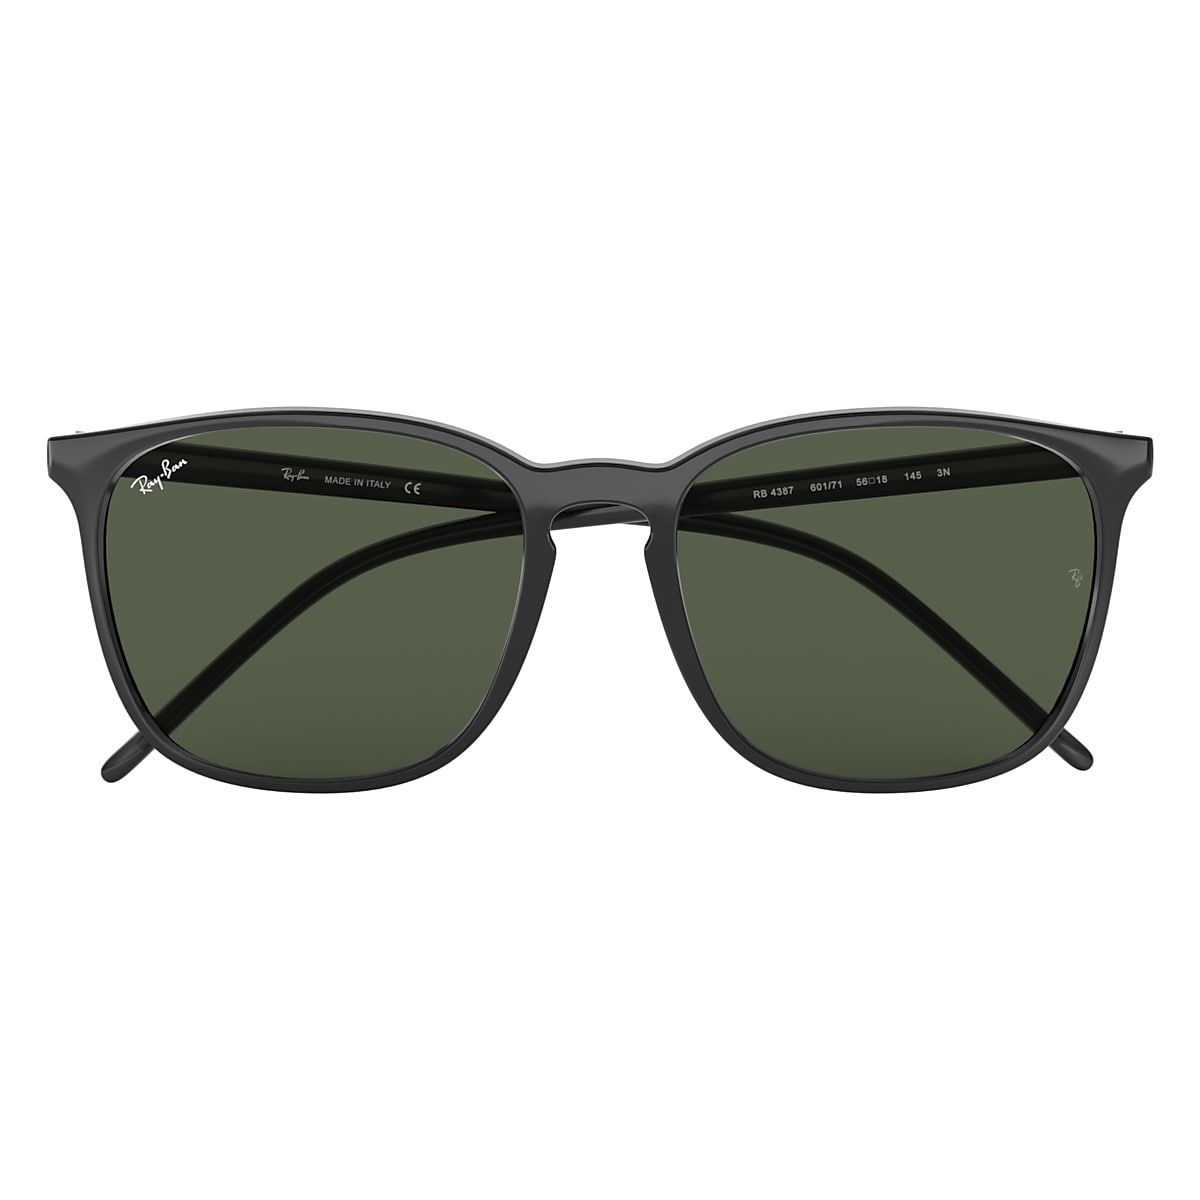 Rb4387 Sunglasses in Black and Green | Ray-Ban®